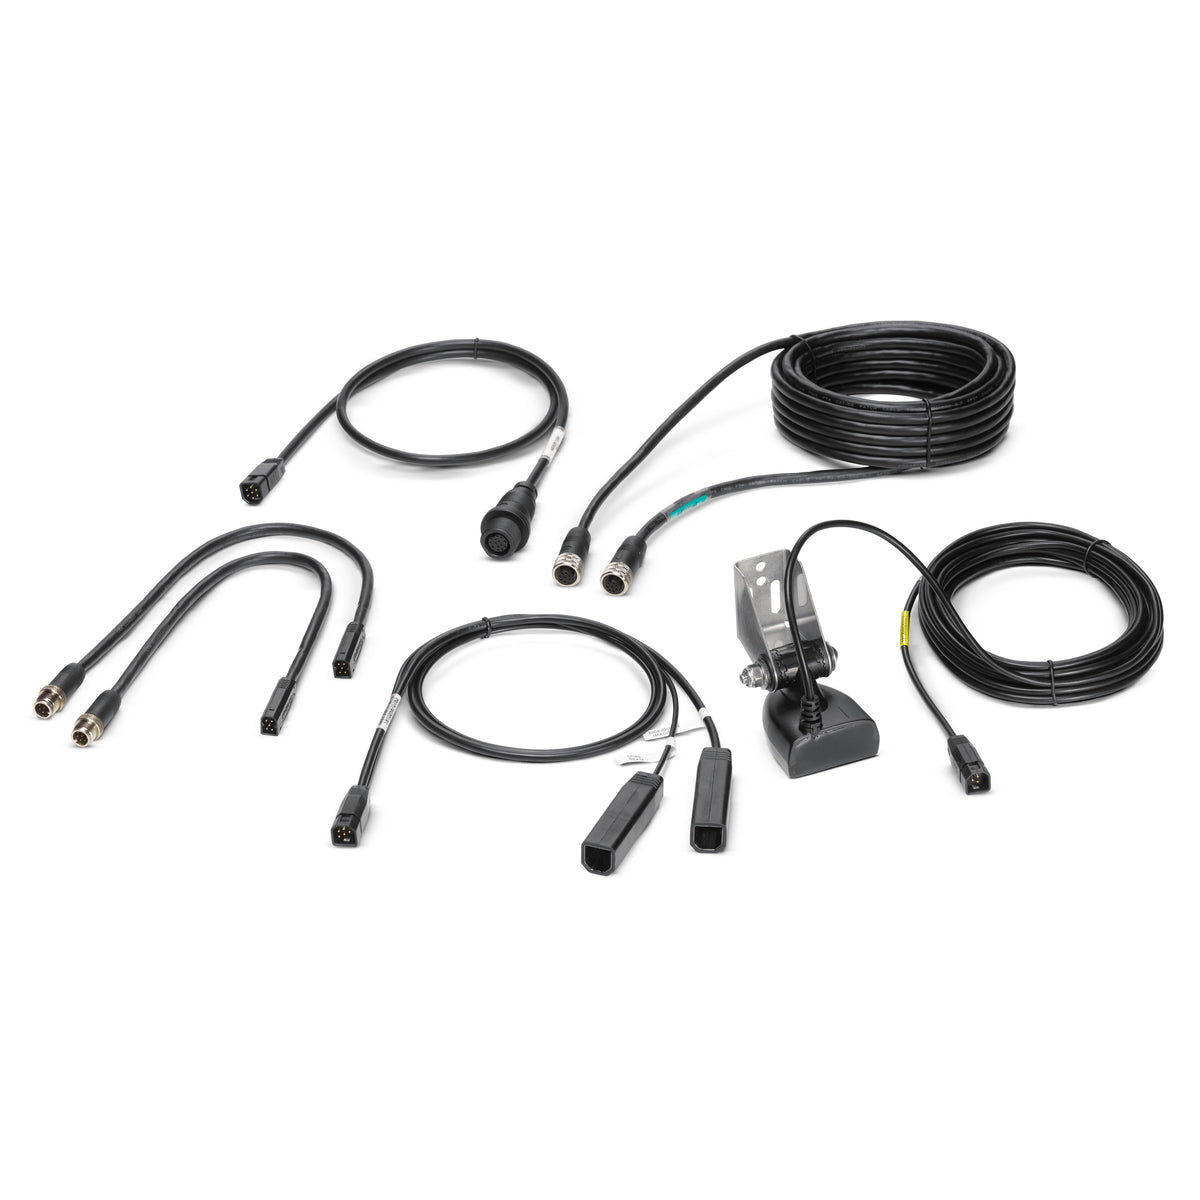 Humminbird Ethernet Cables